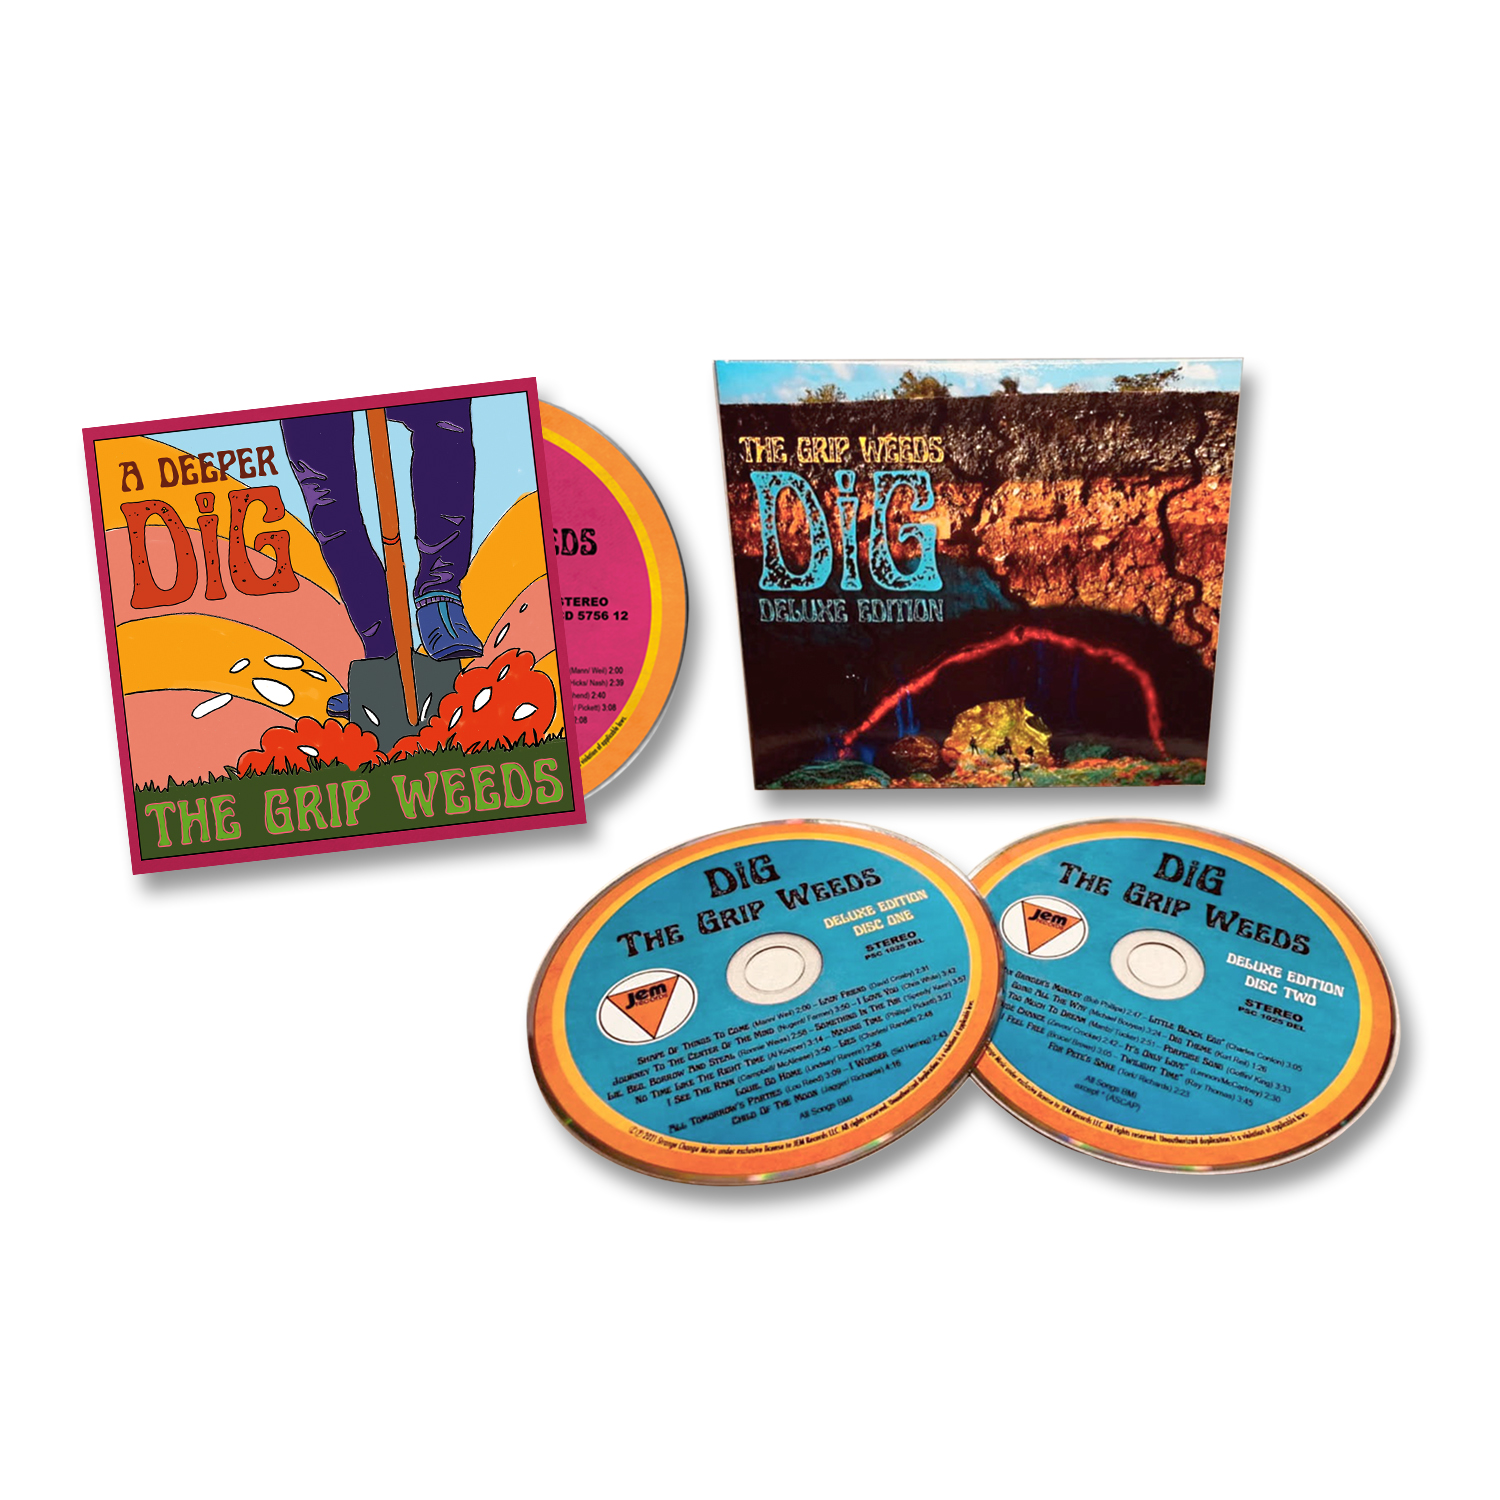 DiG CD SUPER DELUXE Edition (3-Disc Collection)